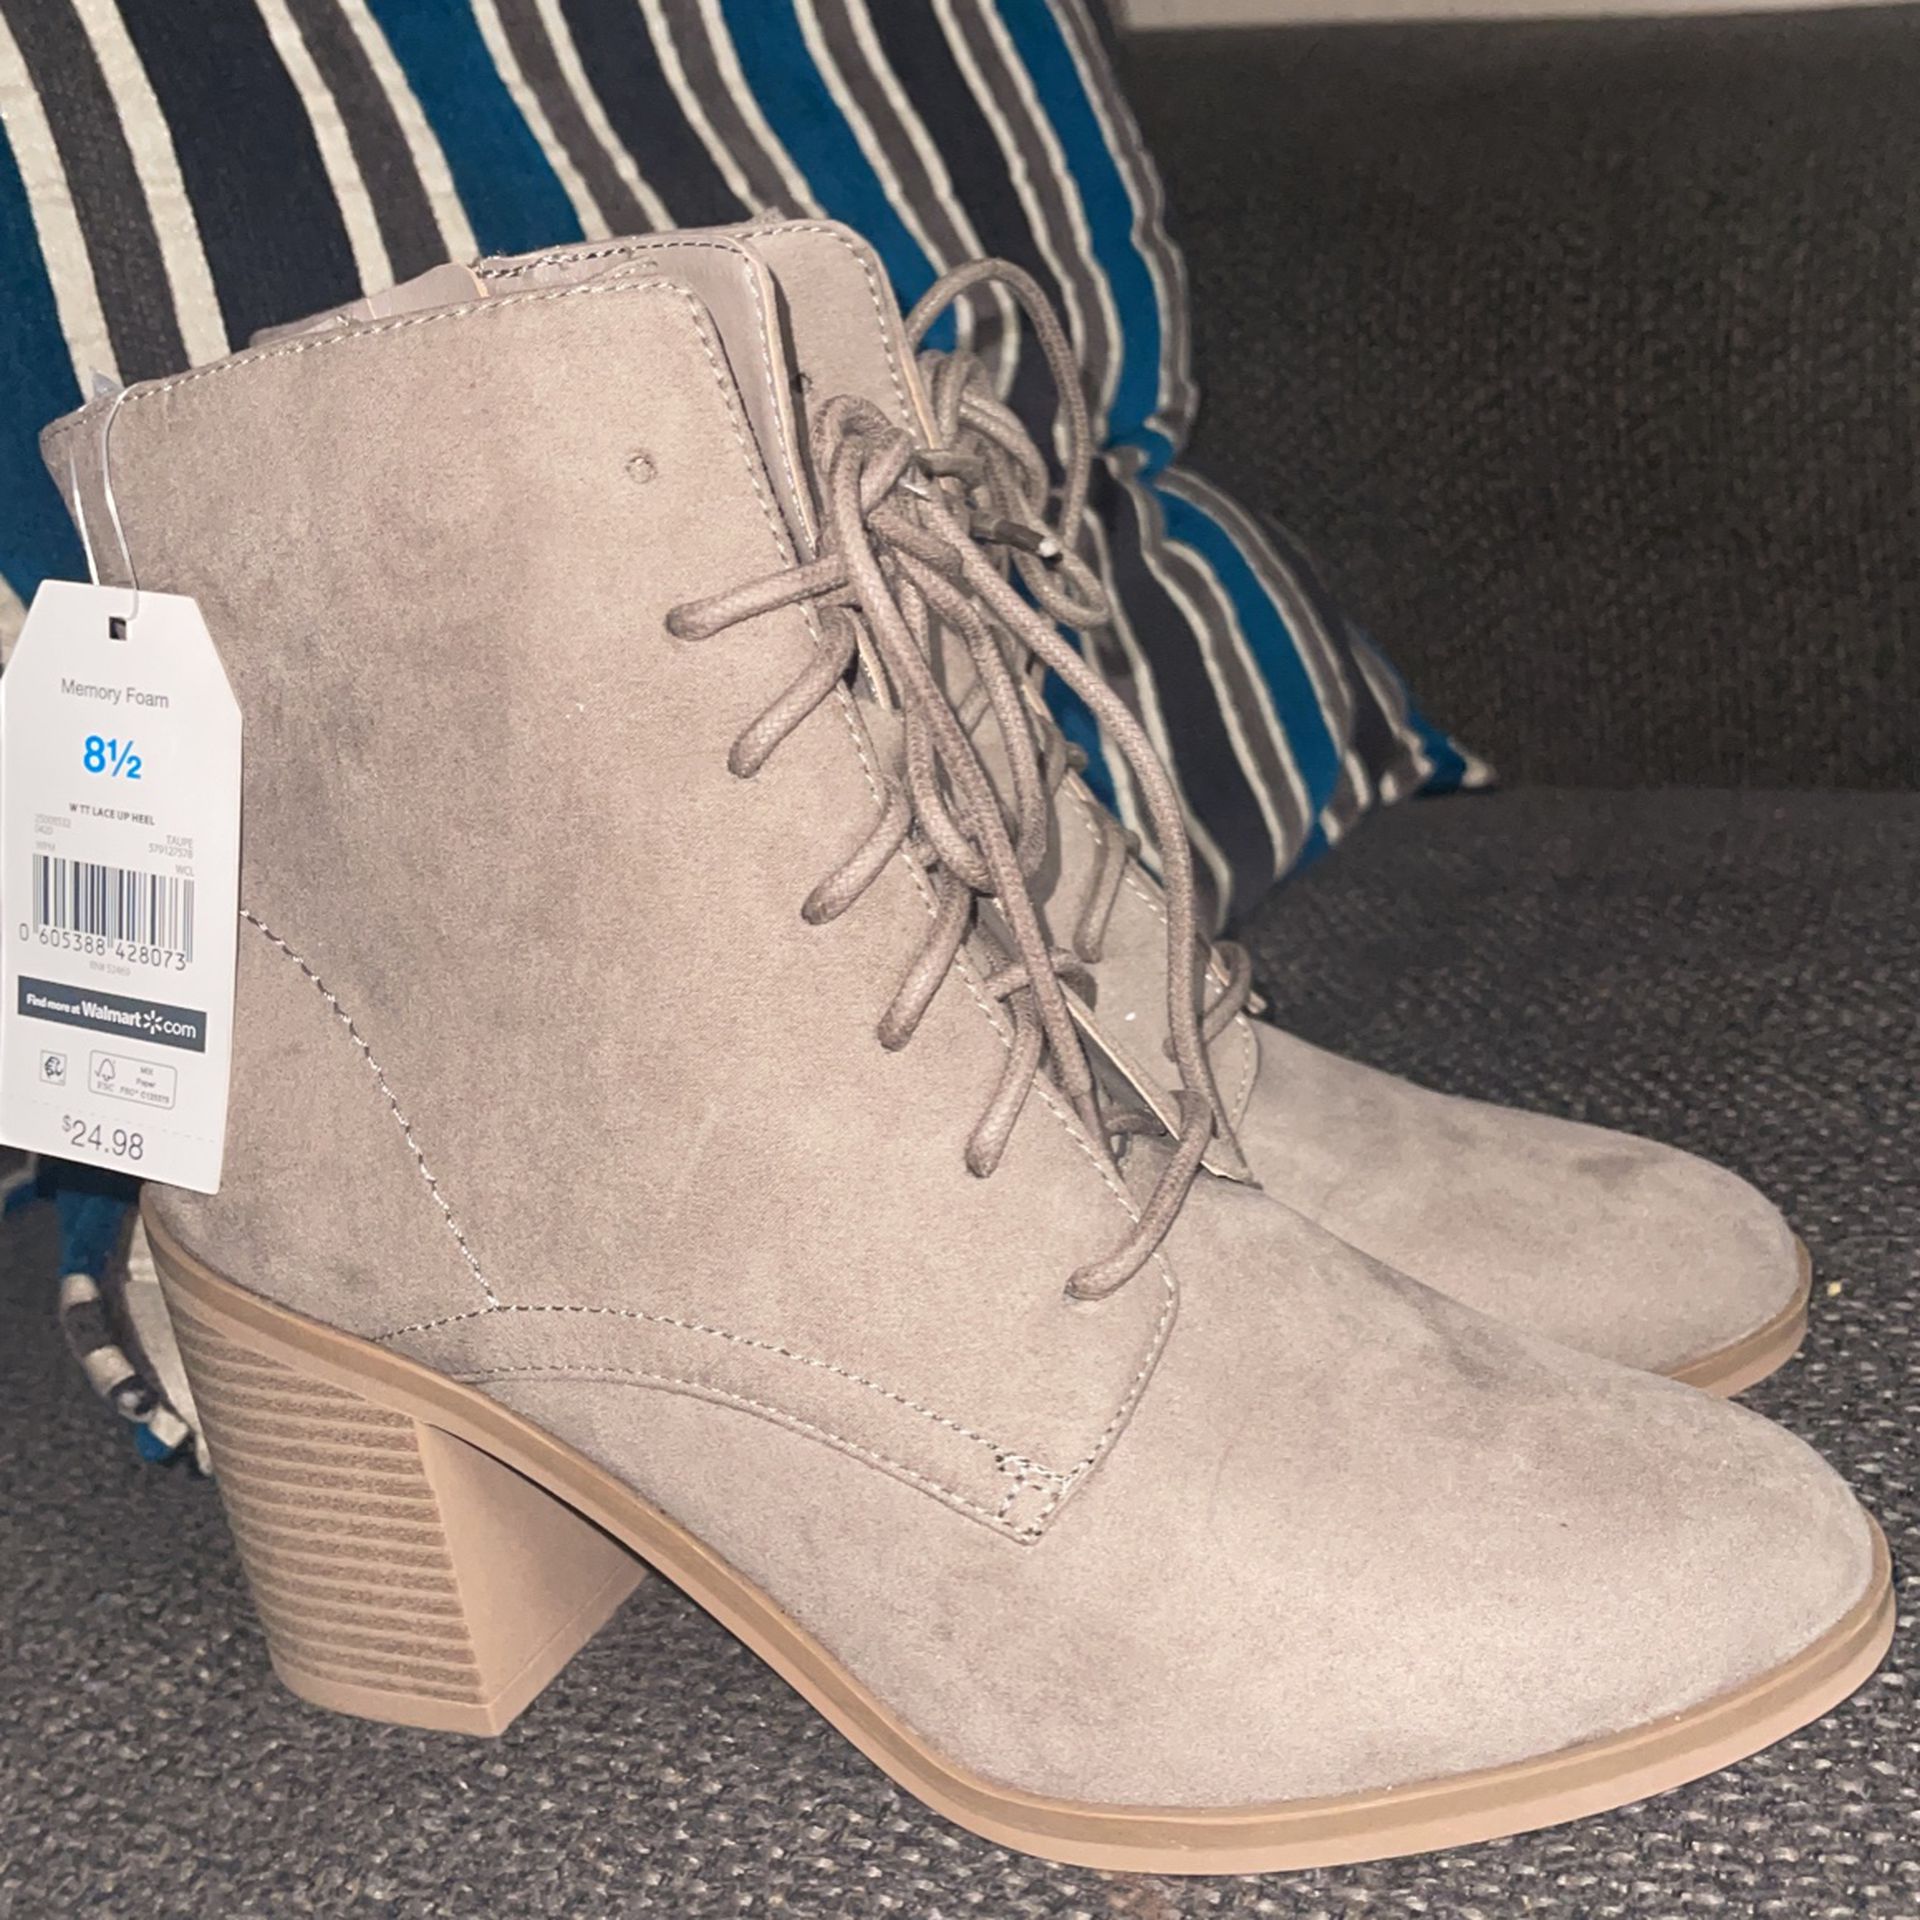 Woman Fall Boots